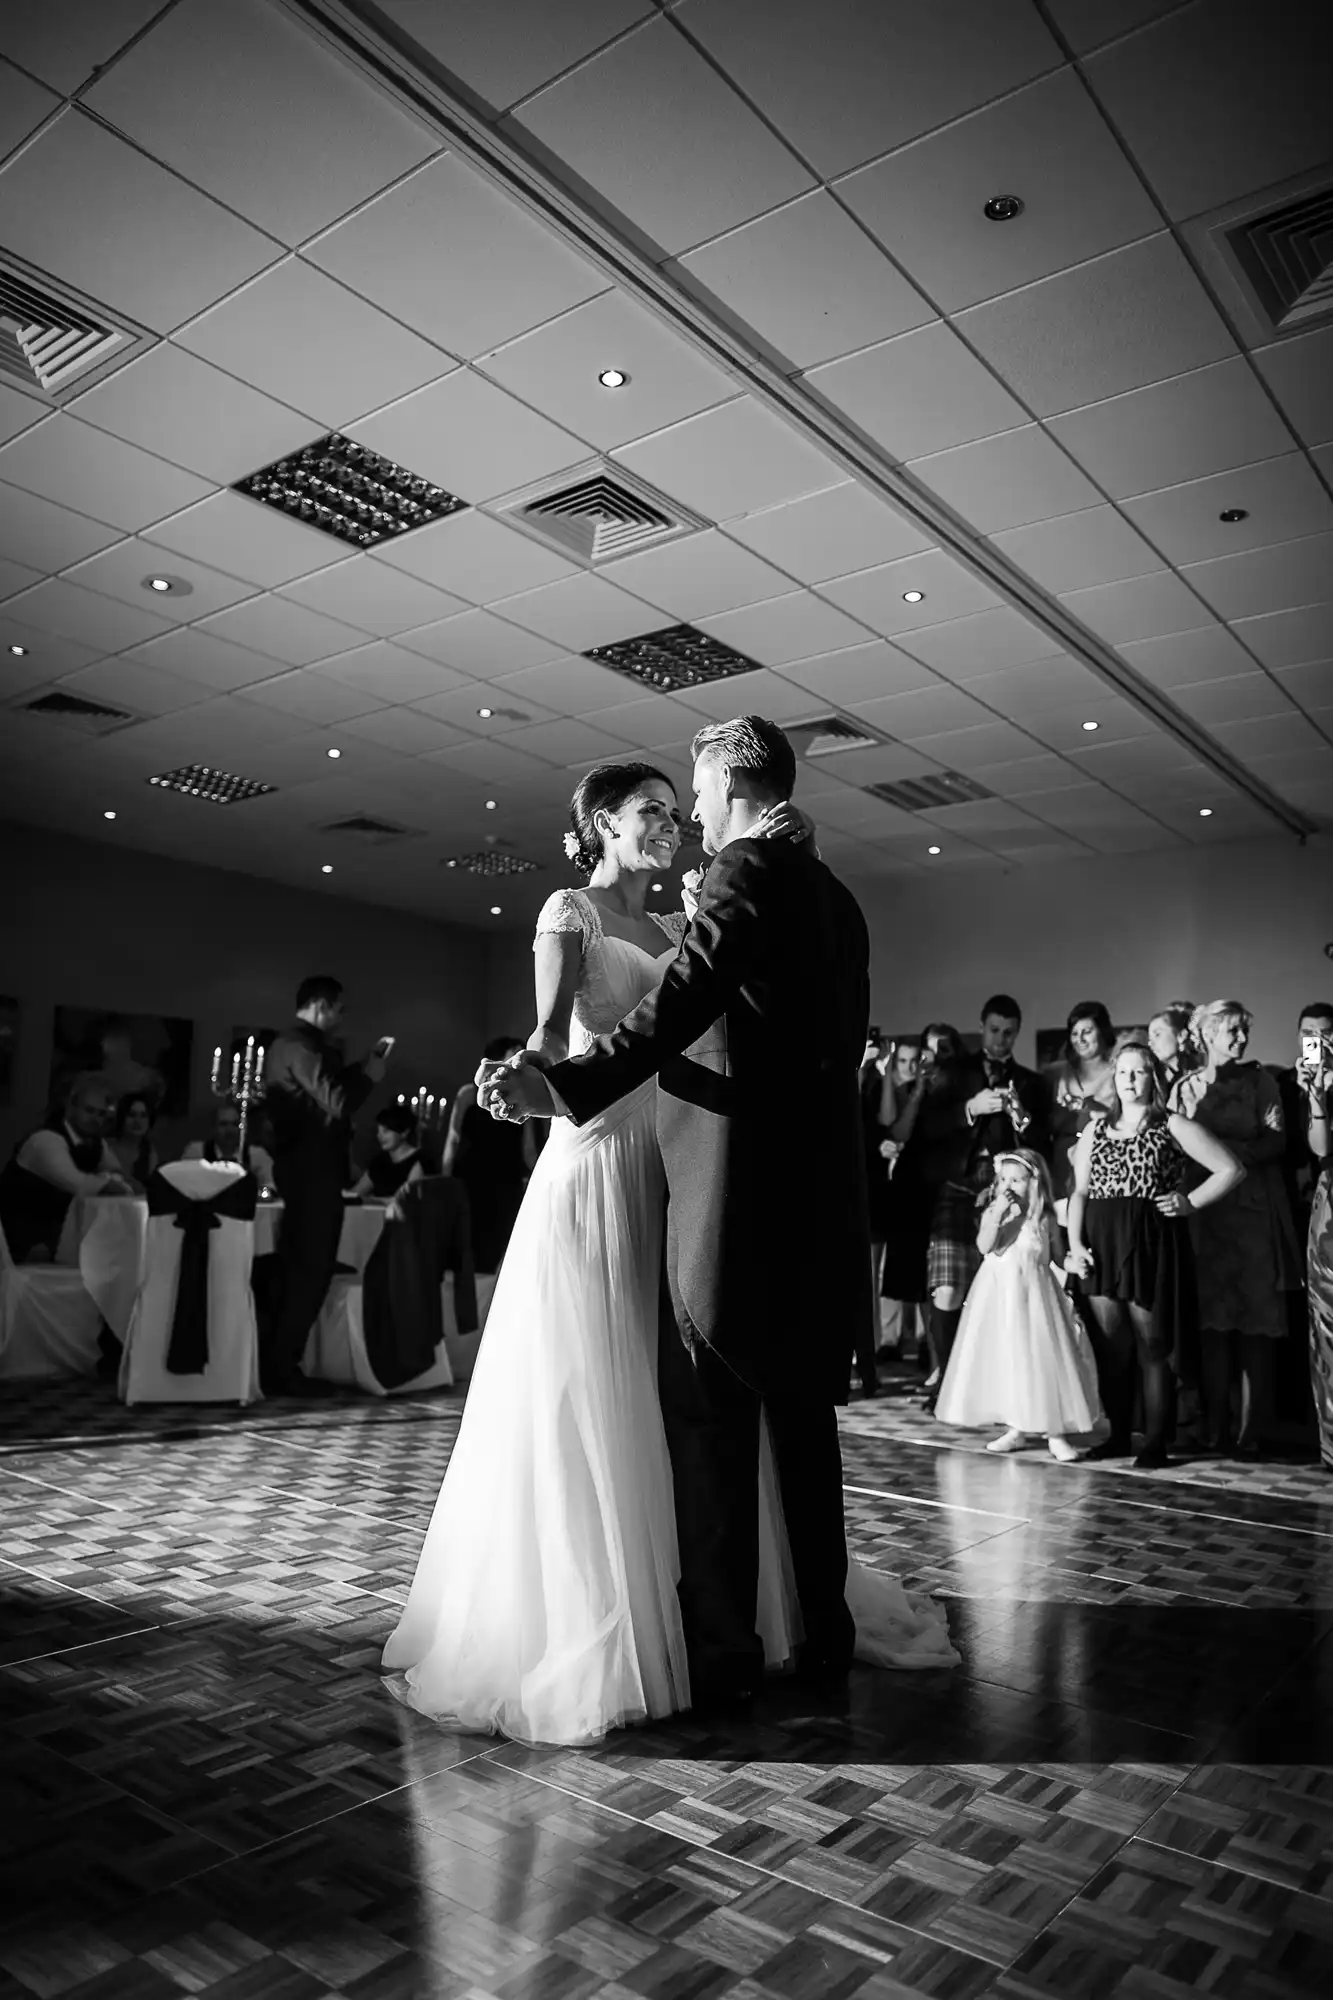 A bride and groom share a dance in a ballroom surrounded by guests, illuminated by overhead lights, captured in black and white.